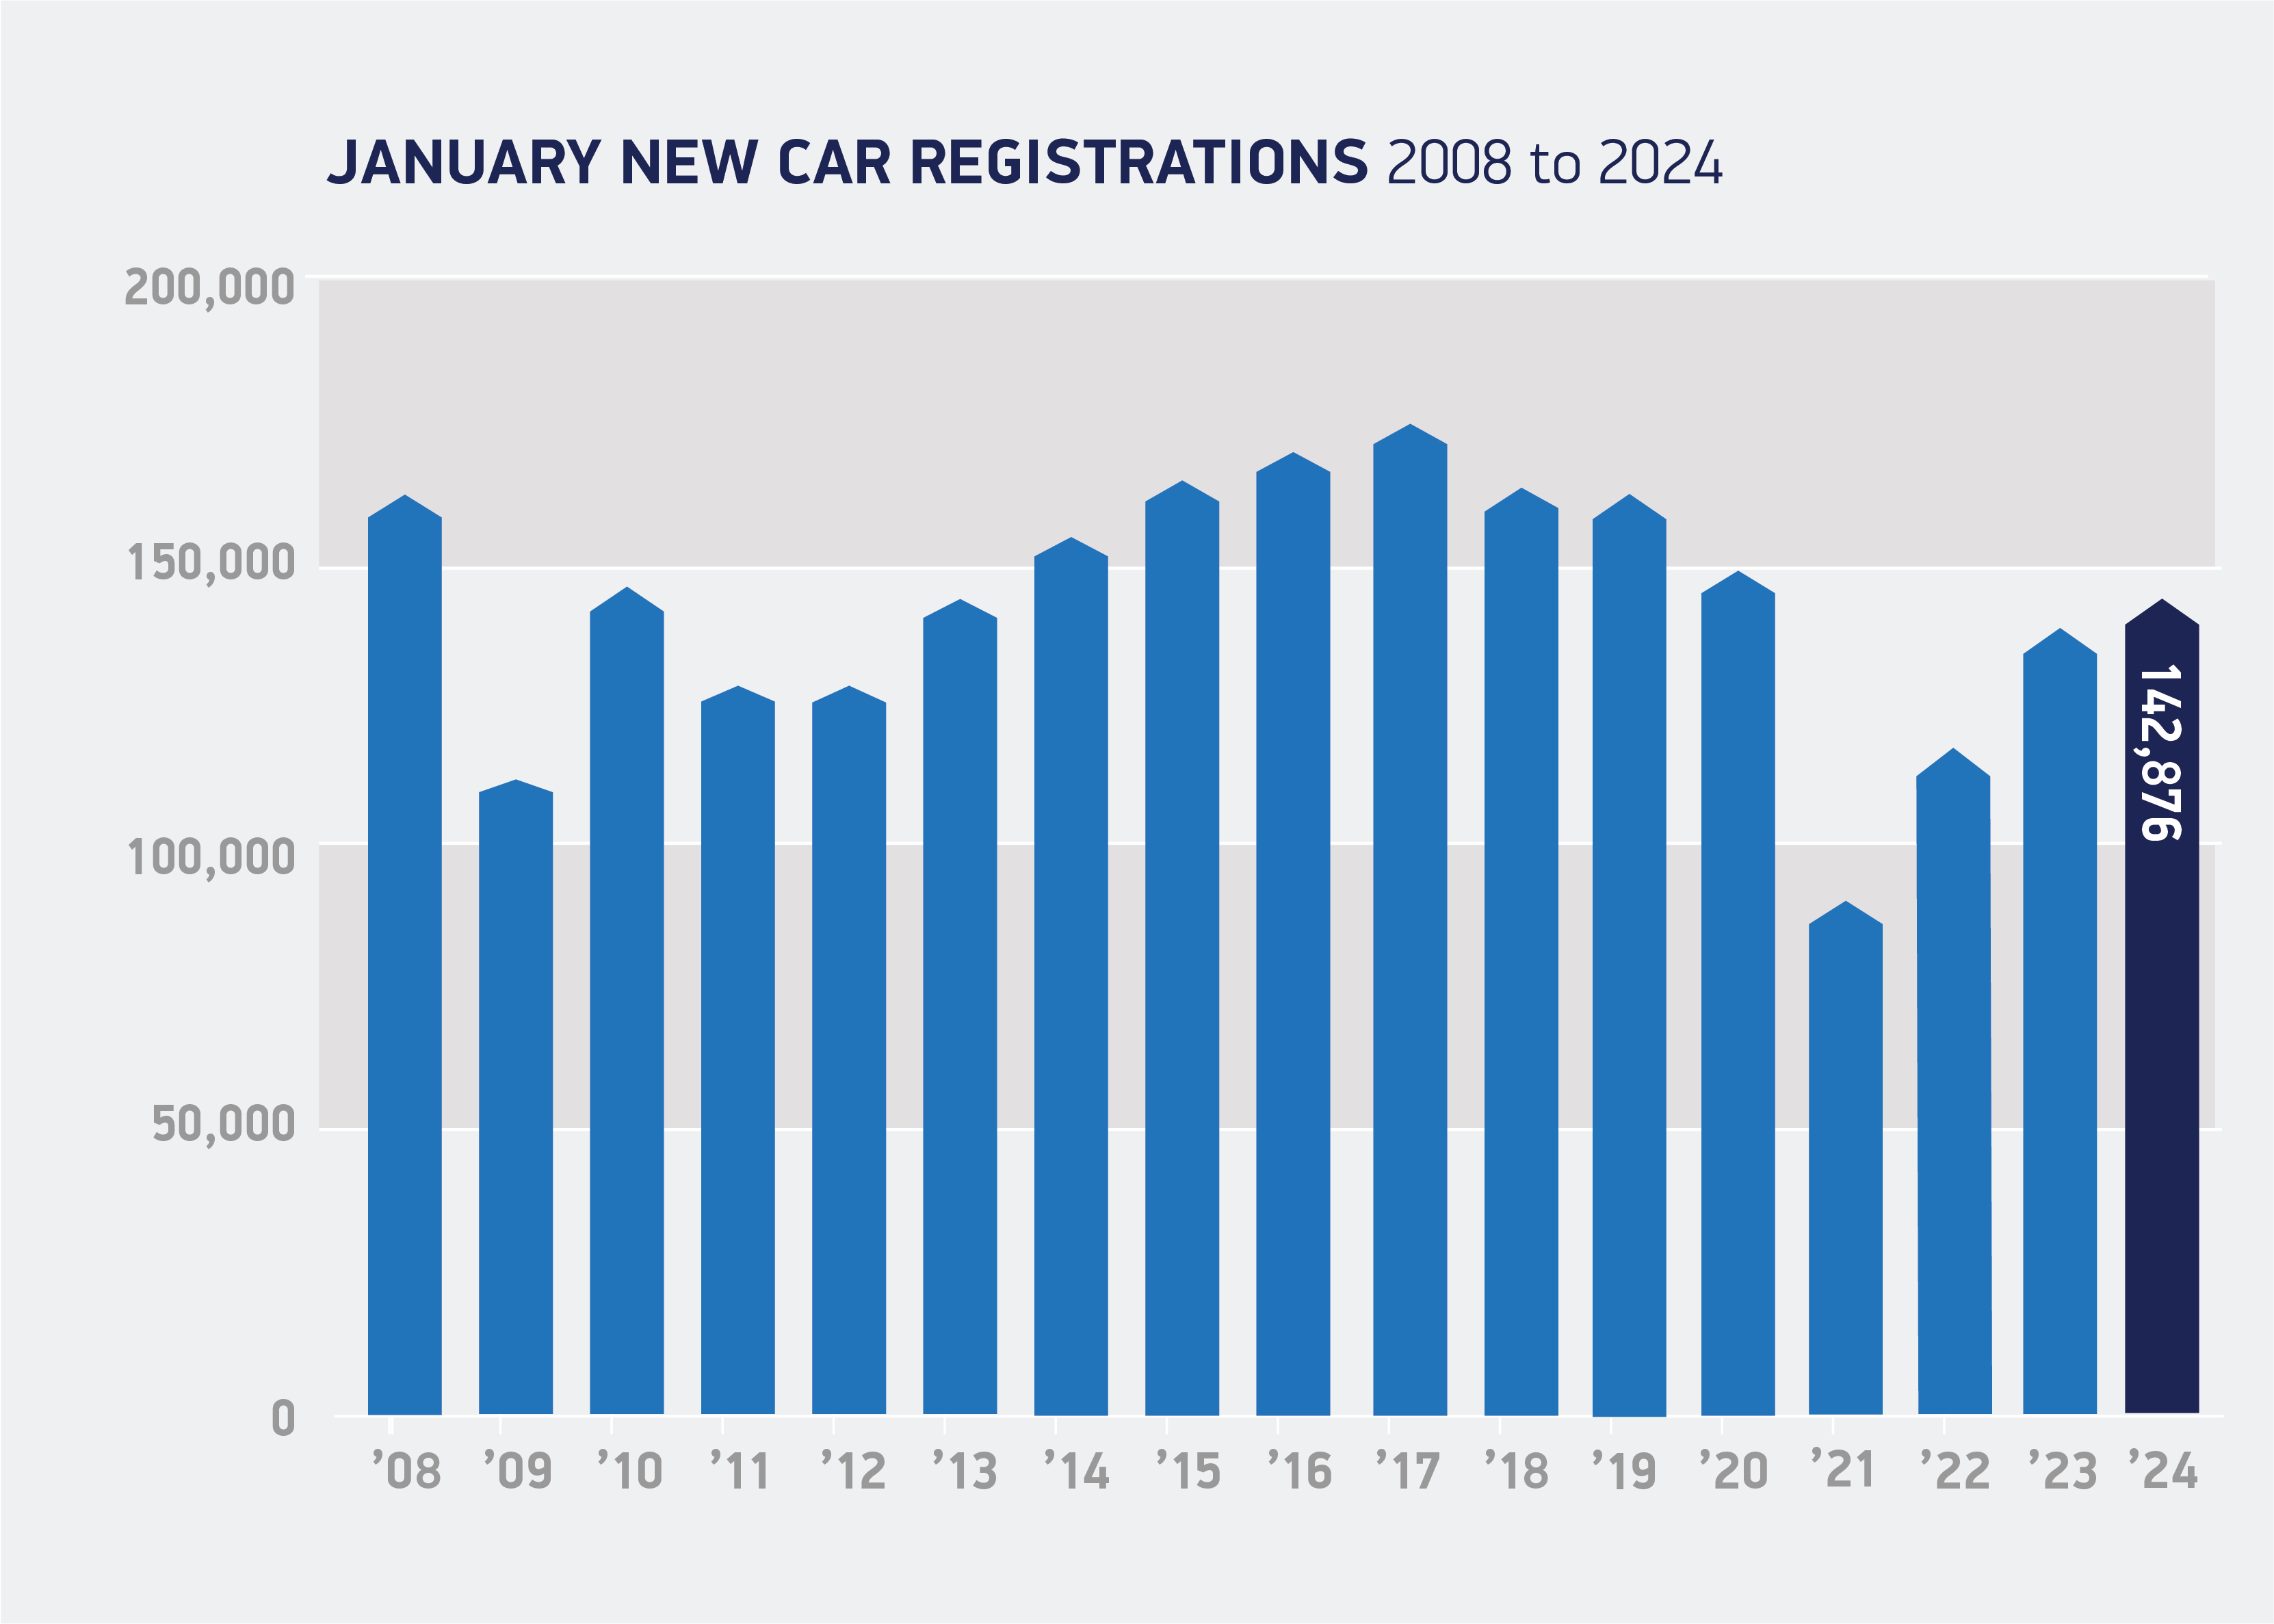 JANUARY registrations 2008 to 2024